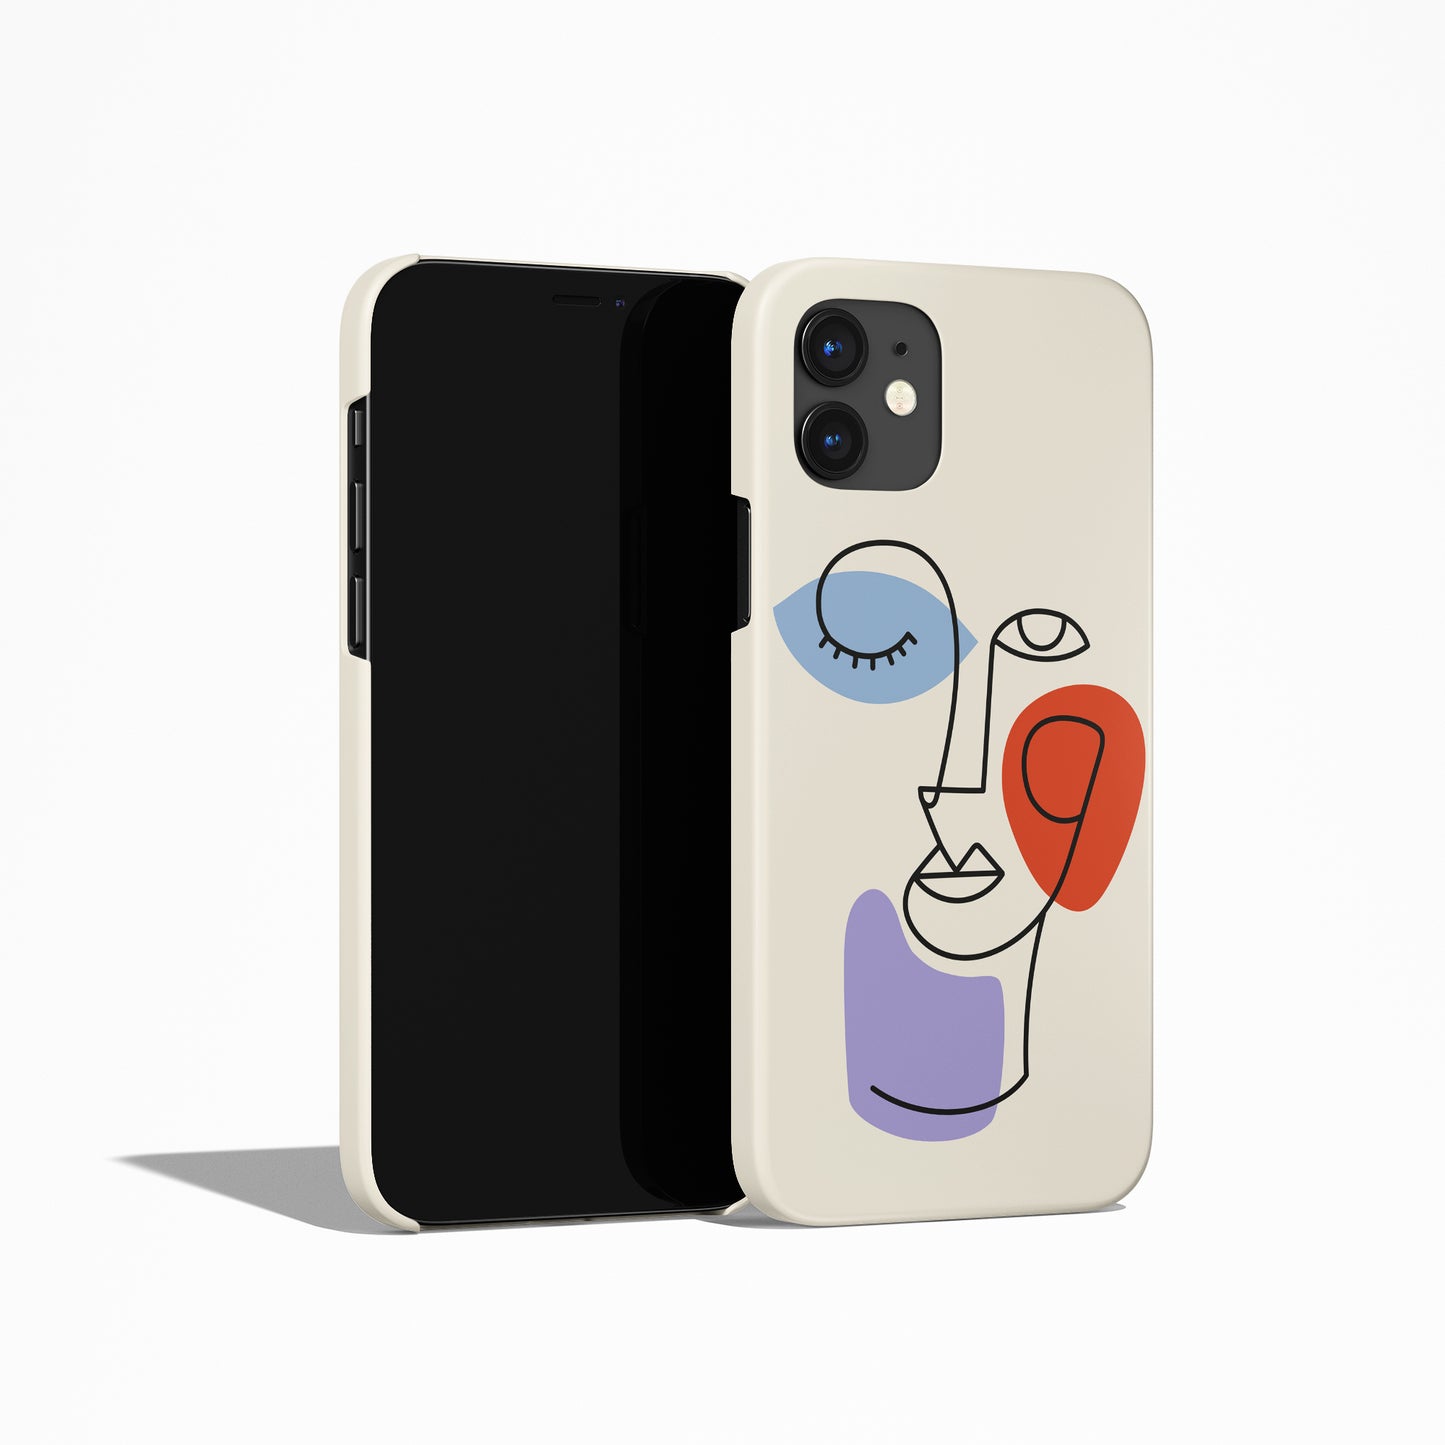 Picasso Inspired Line Art iPhone Case